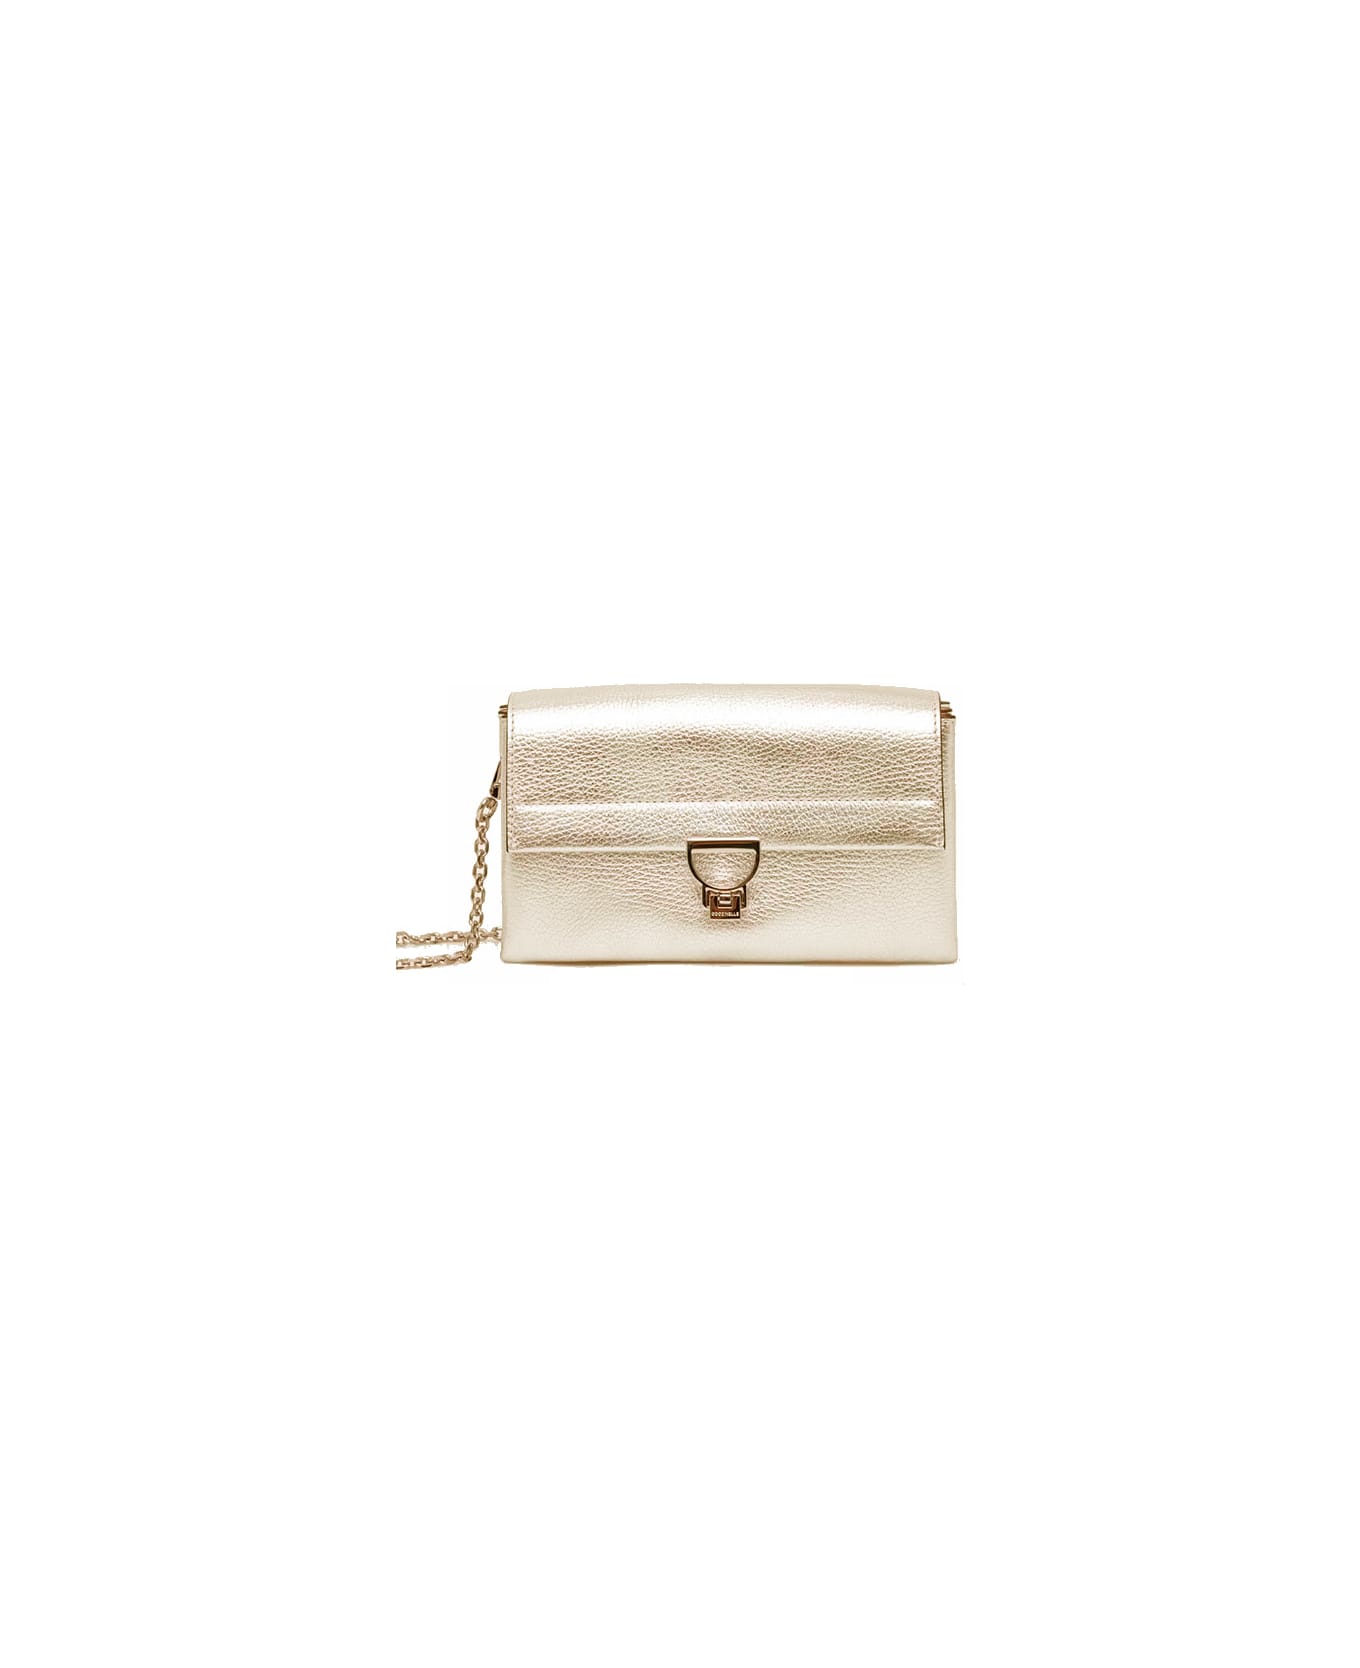 Coccinelle Arlettis Small Bag - Pale gold